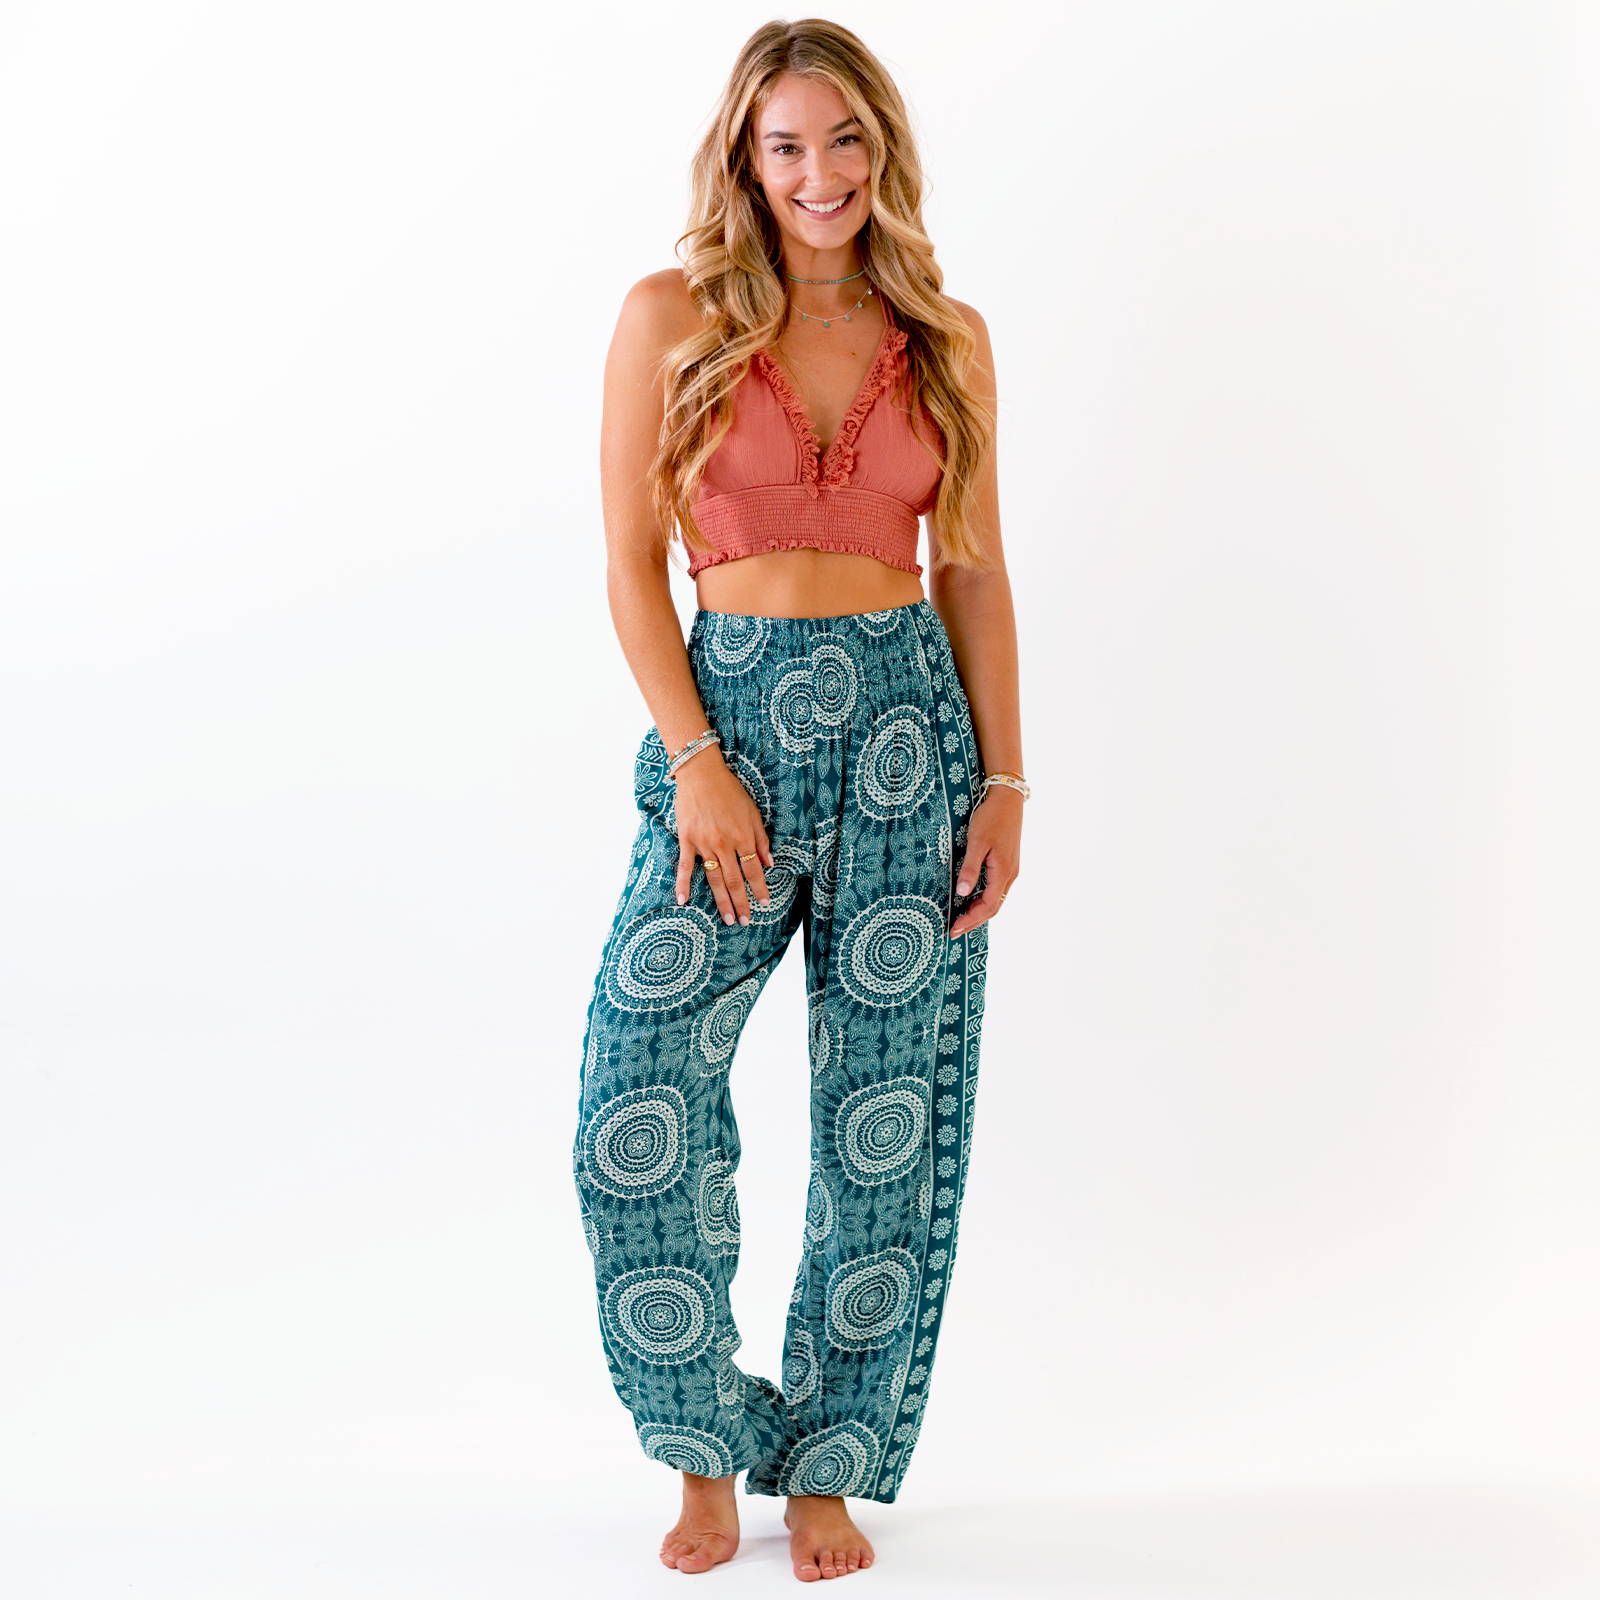 Women's Teal Harem Pants from Lotus and Luna